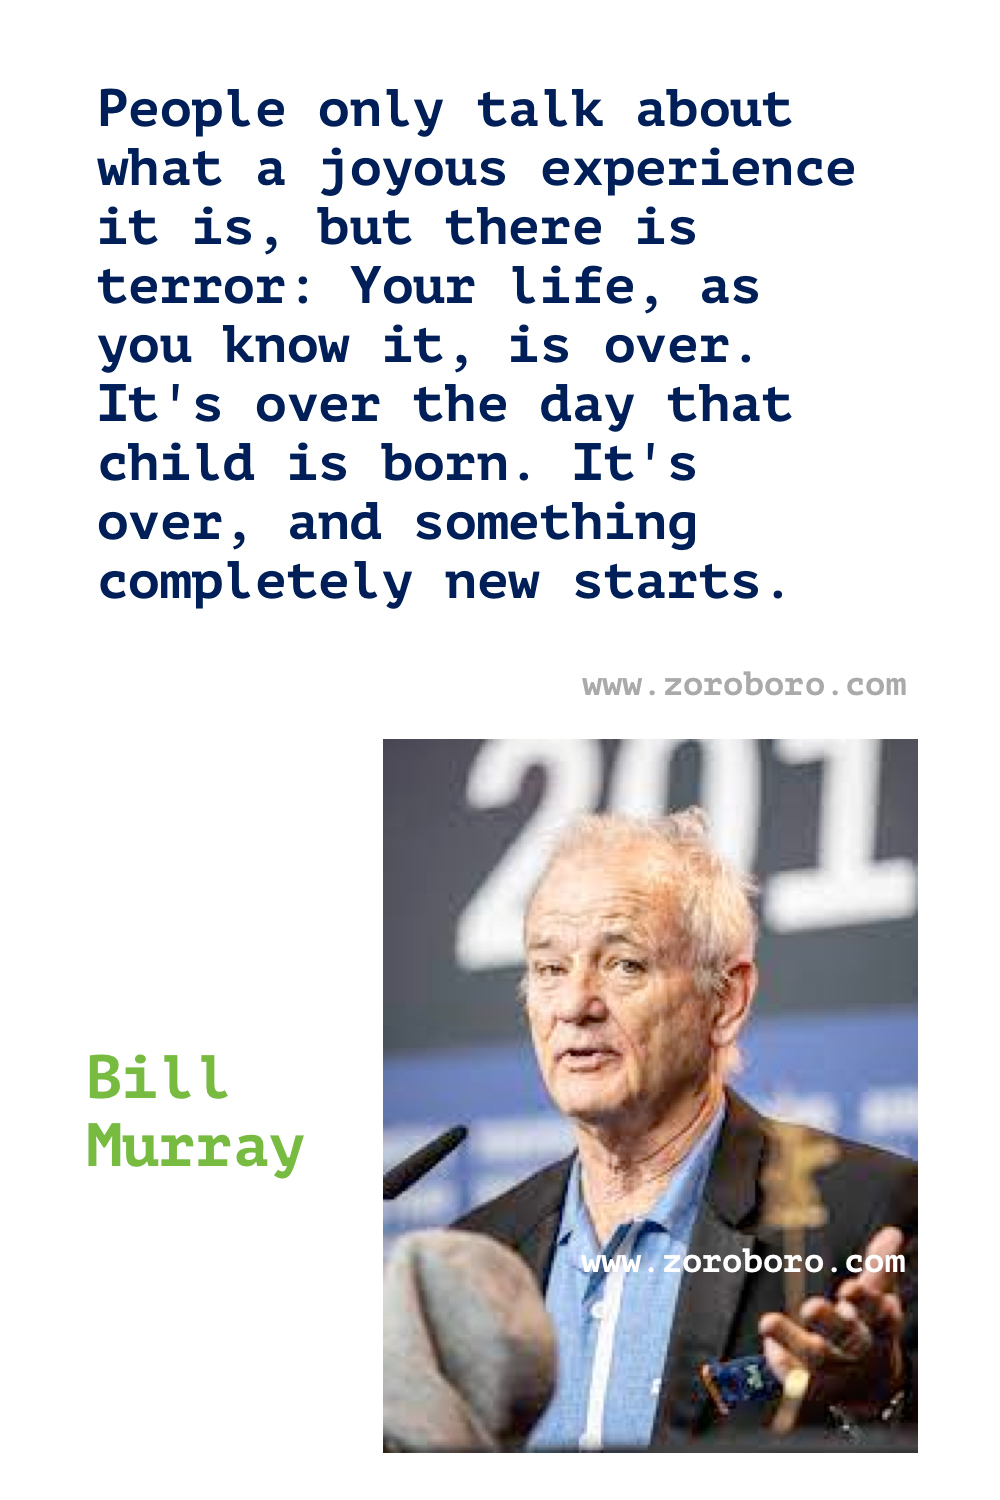 Bill Murray Quotes. Bill Murray Quote about Dogs Quote, Love Quote, Life Quote, Actor & Comedian. Bill Murray Relax Quote, Bill Murray Change Quote, Funny Bill Murray Quotes. Bill Murray Movies Quote.